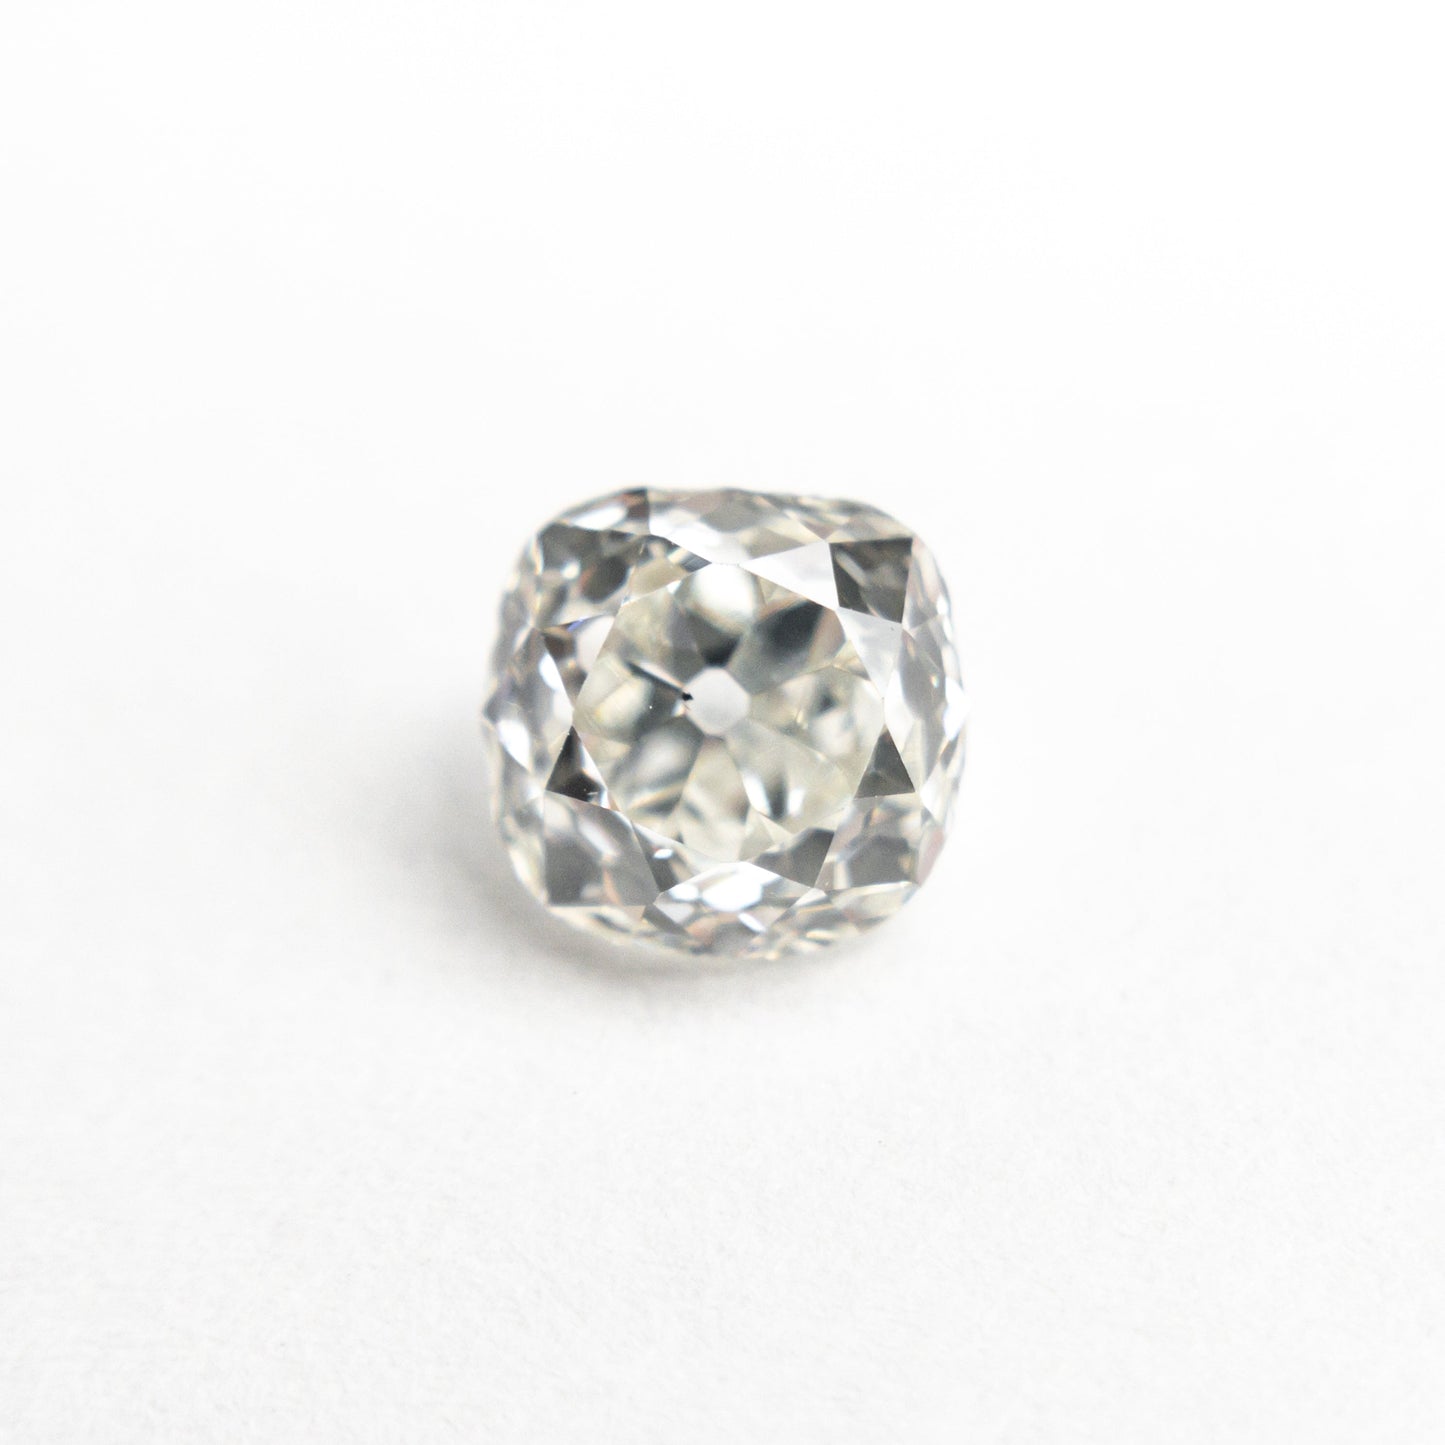 1.28ct 6.15x6.00x4.33mm GIA SI1 H Antique Old Mine Cut 22064-01